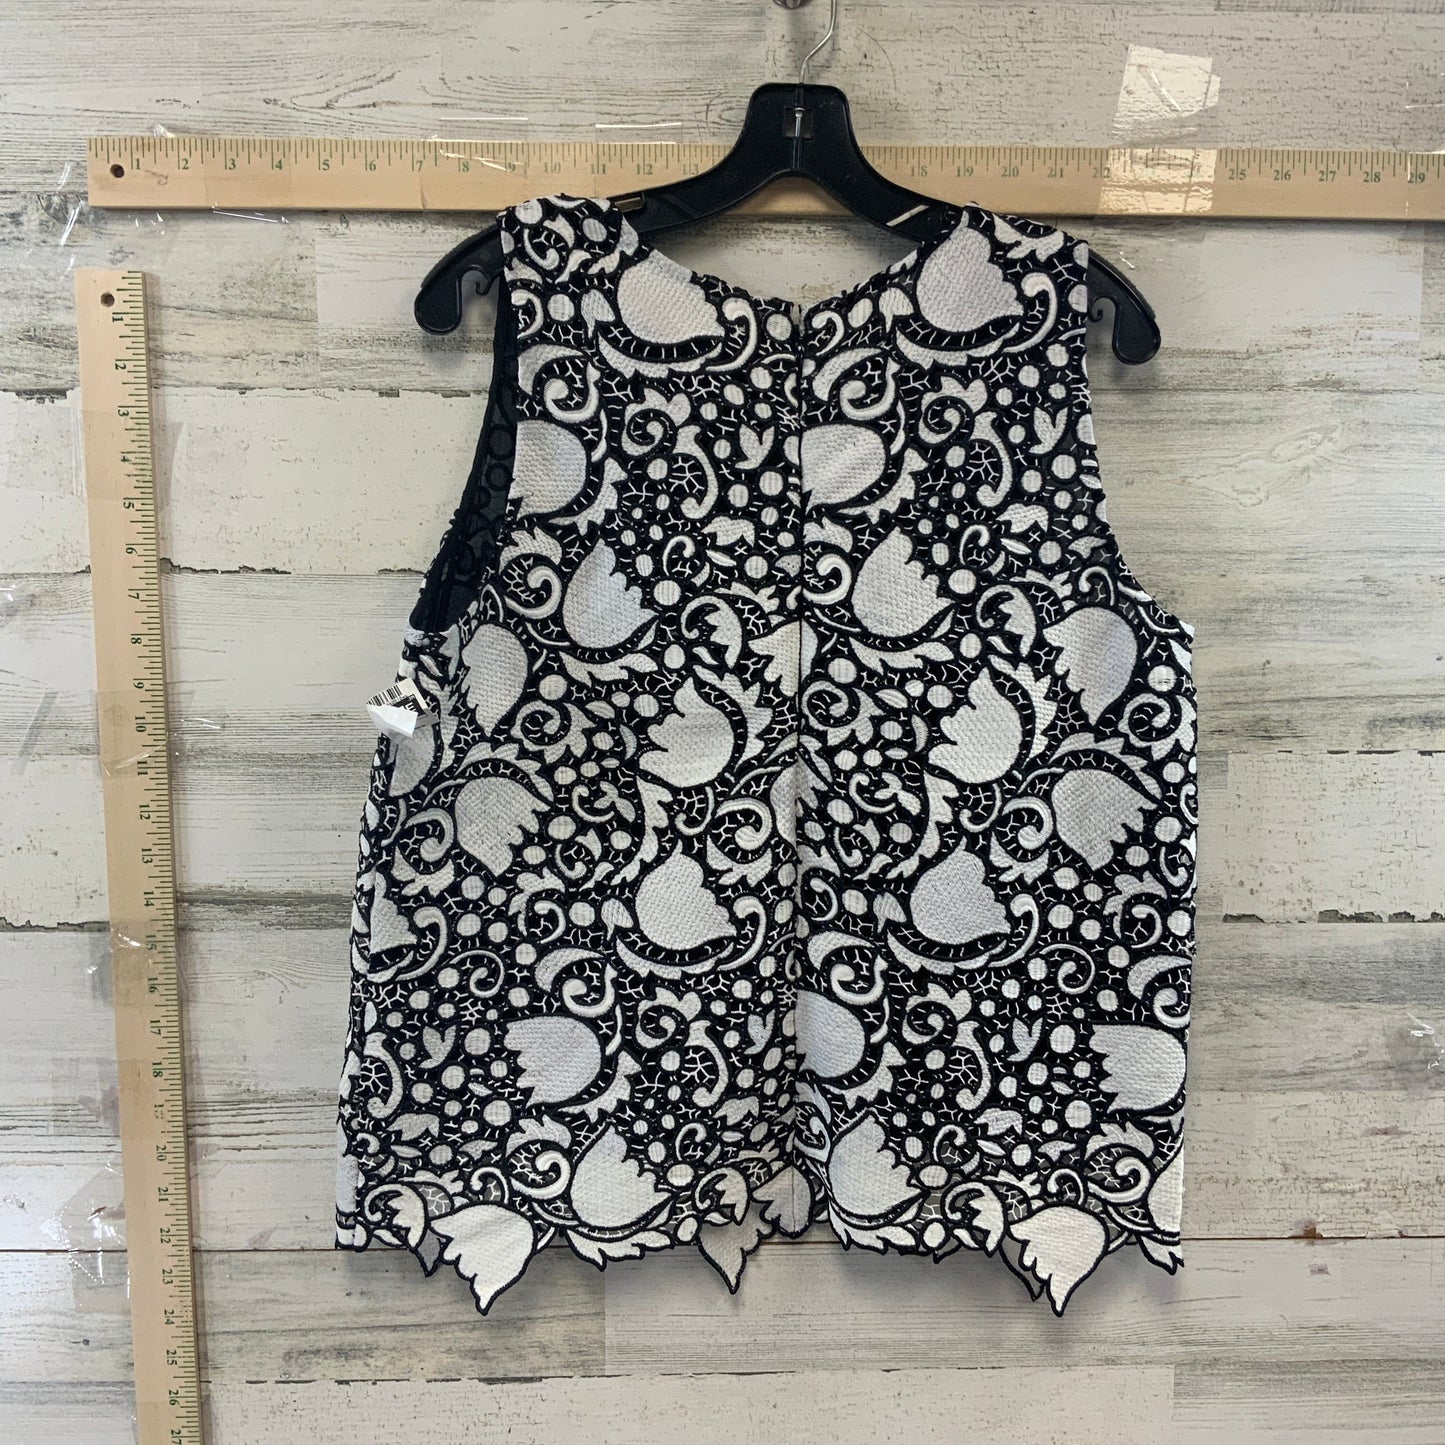 Top Sleeveless By Ann Taylor  Size: M